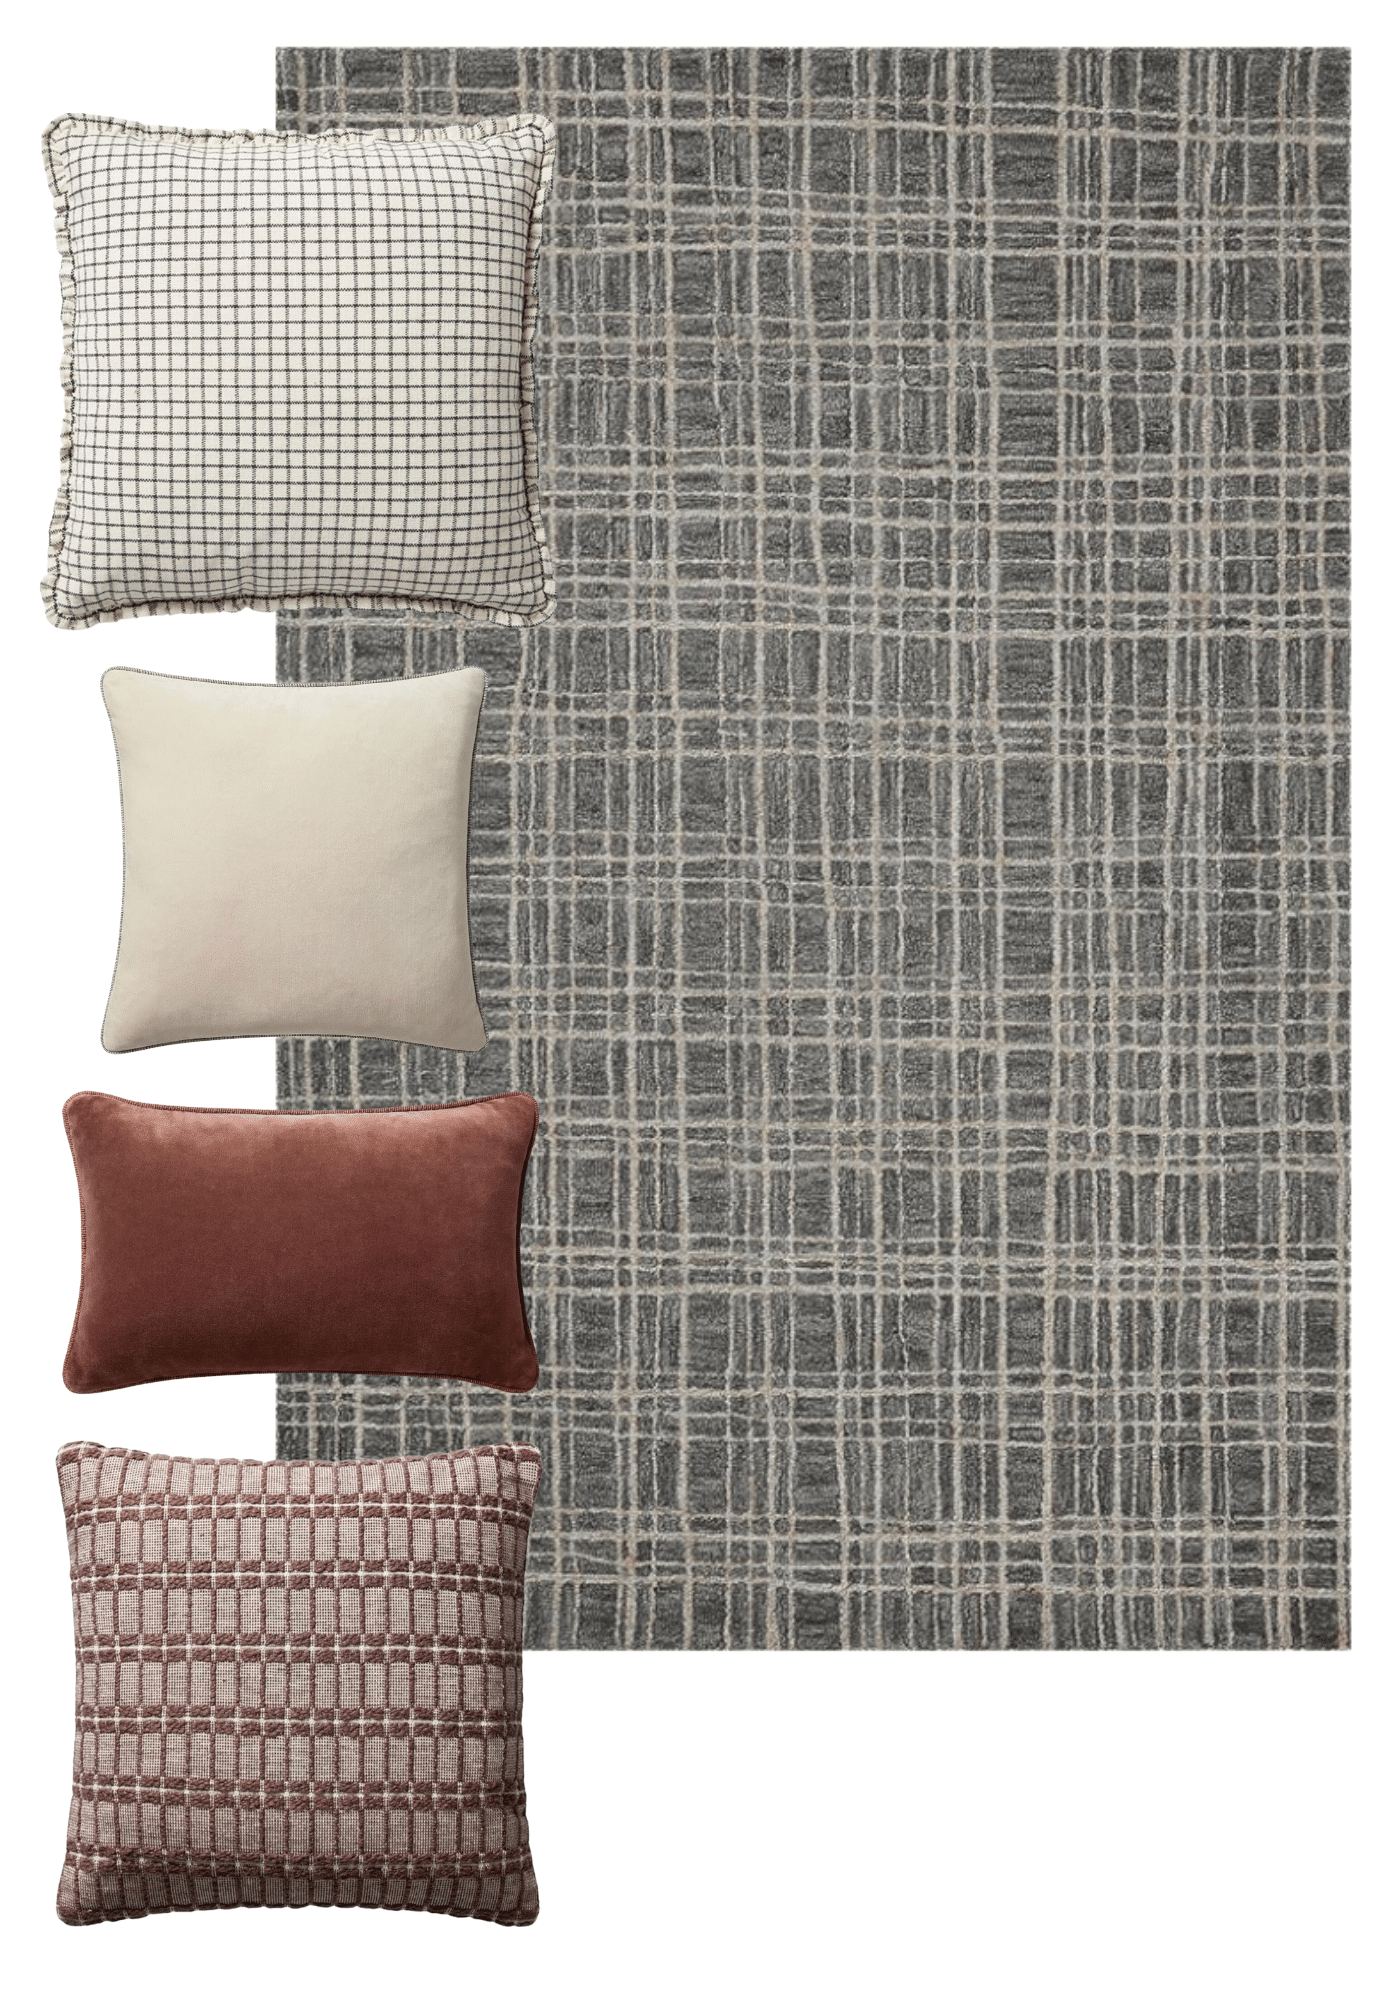 Chris Loves Julia My Favorite Pillow & Rug Pairings | Polly Rug in Graphite and Pebble with Pillows